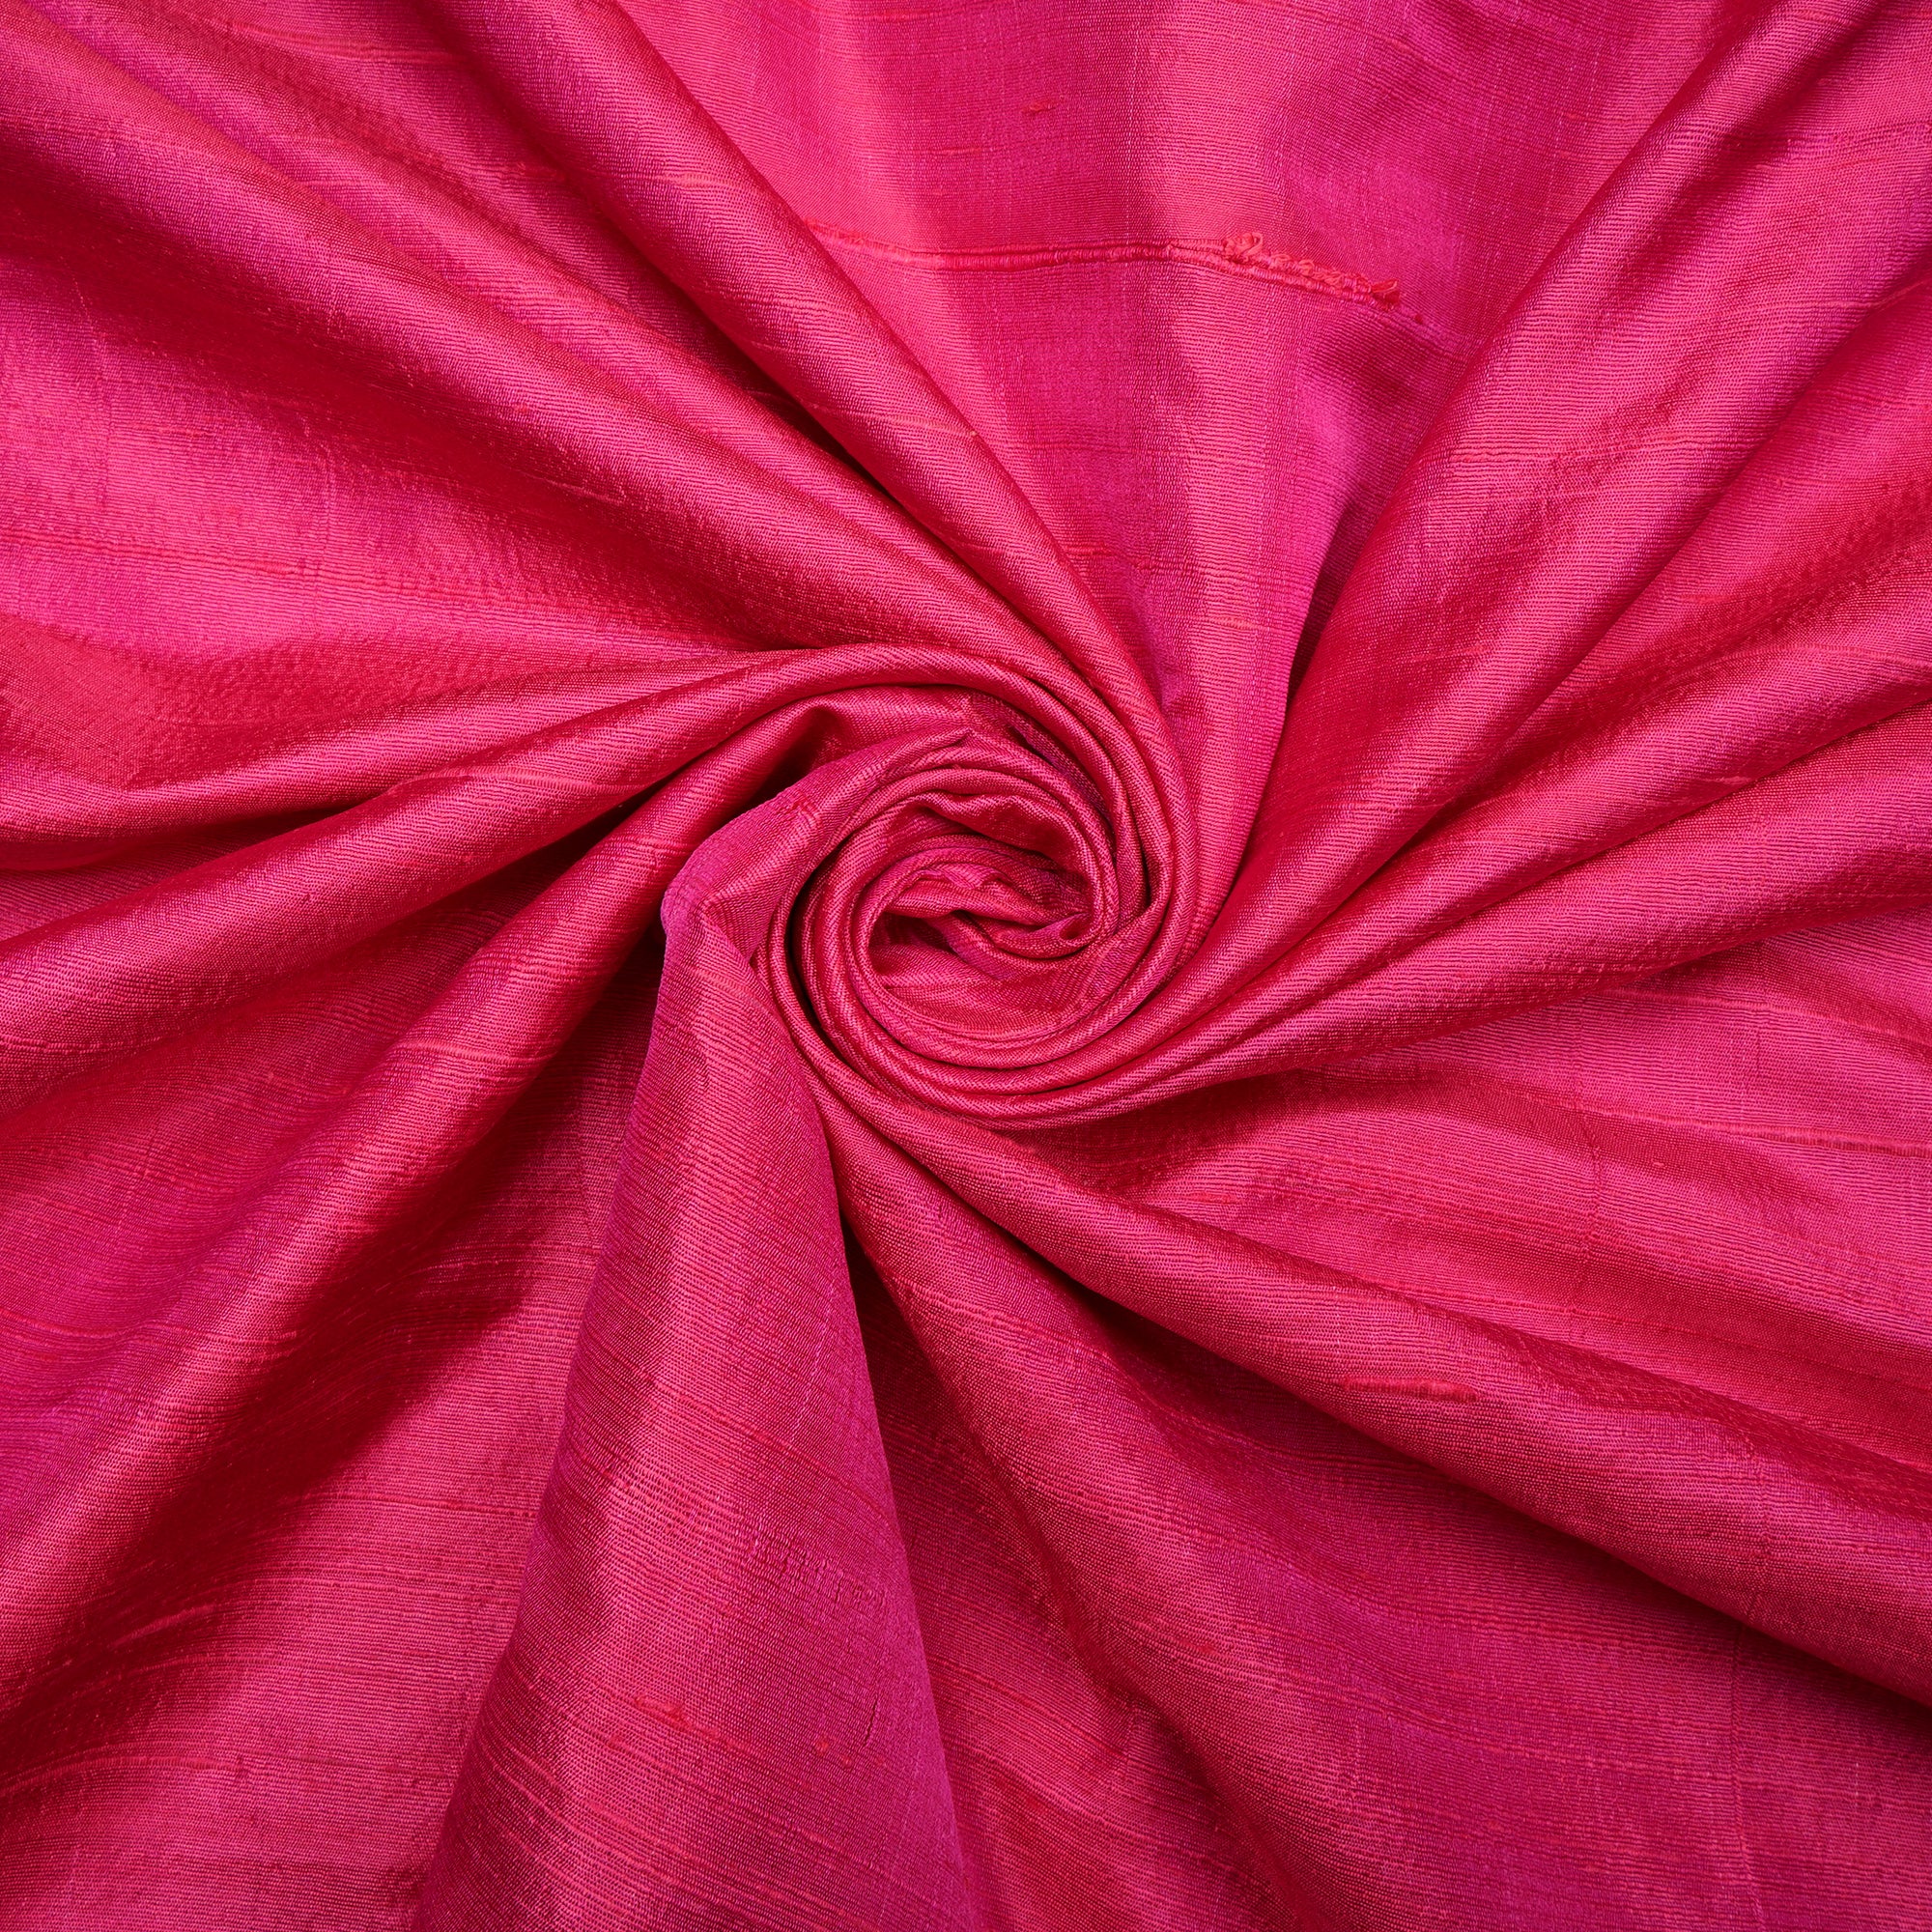 Hot Pink Color Blended Dupion Silk Fabric